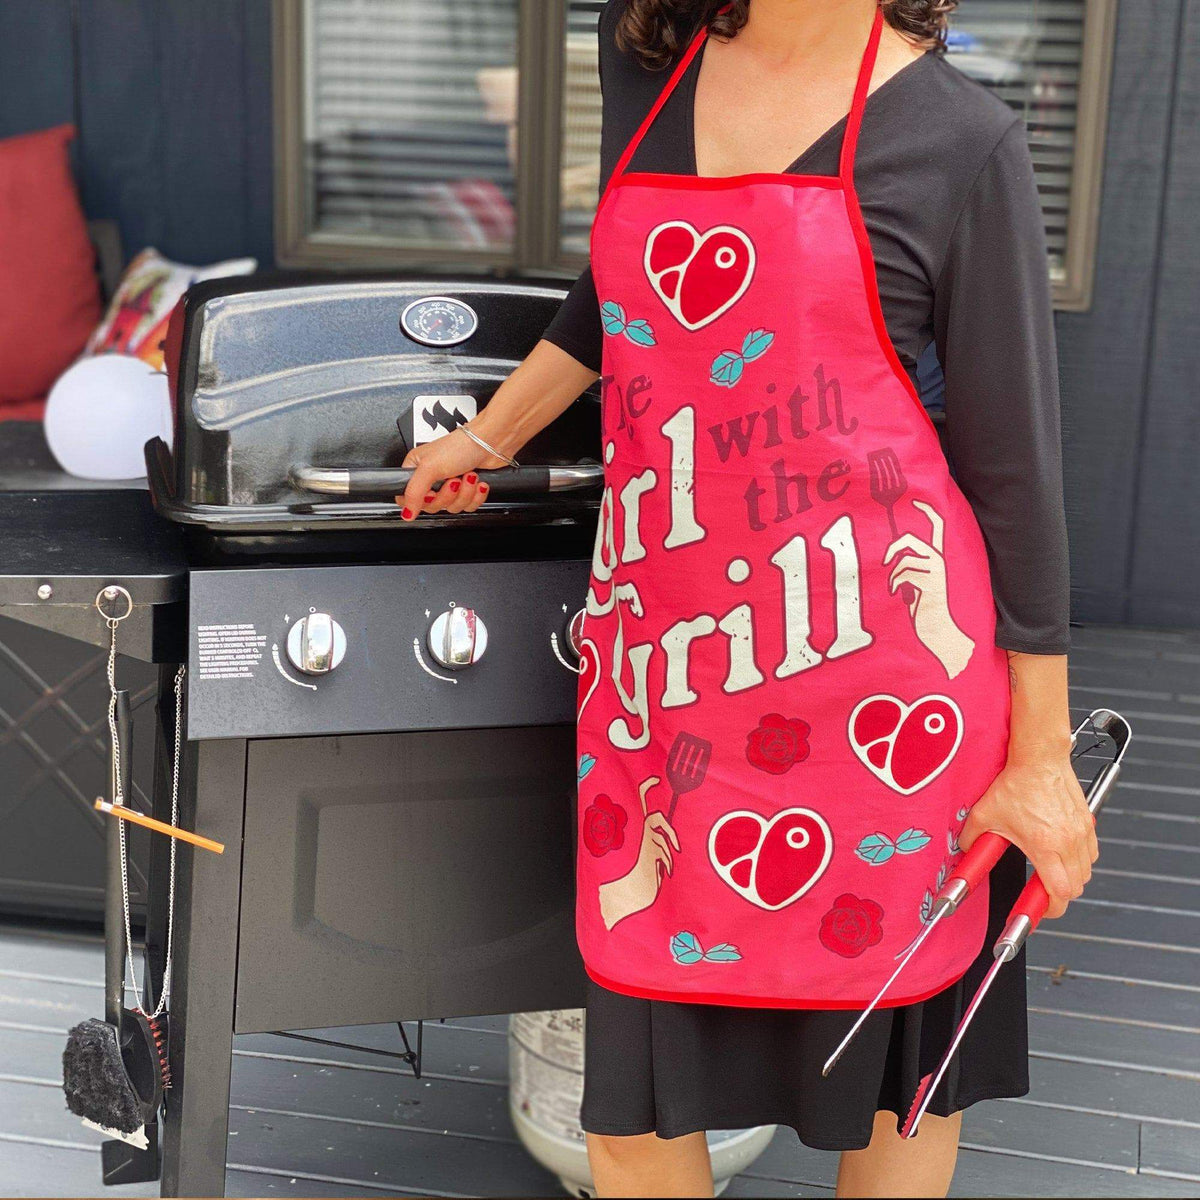 The Girl With The Grill Apron - Crazy Dog T-Shirts